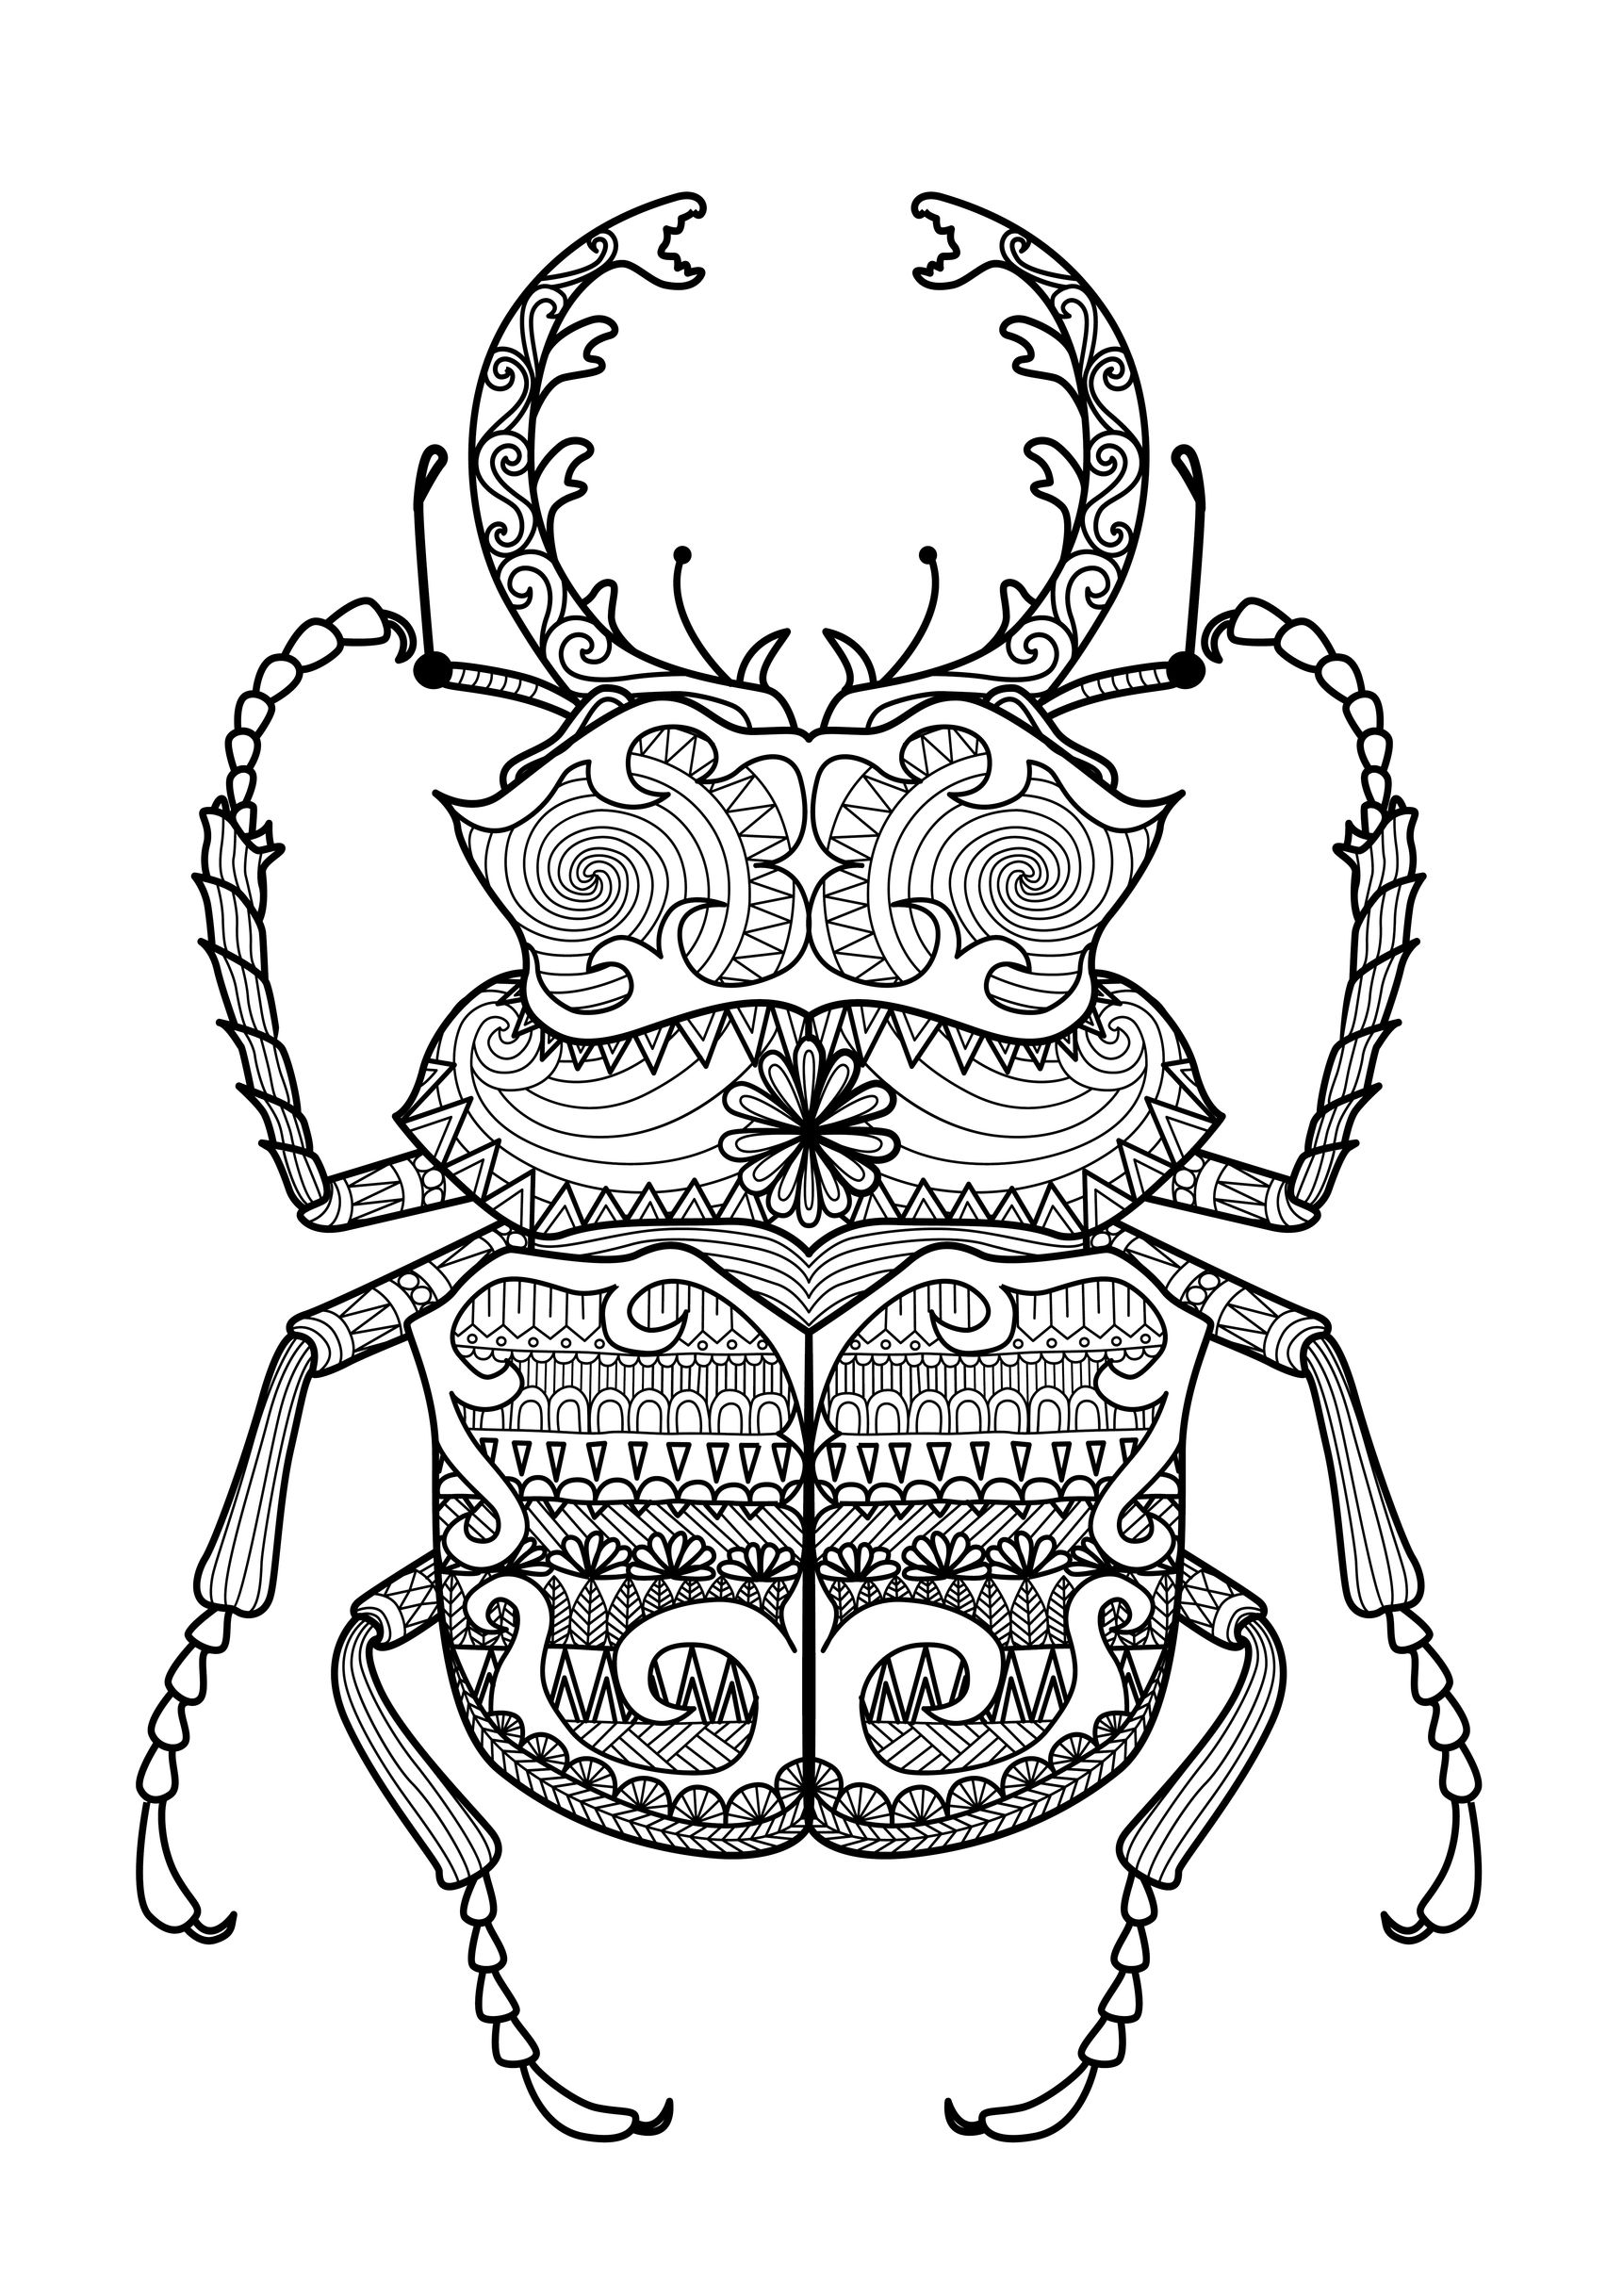 Zentangle Beetle Zentangle Adult Coloring Pages Page 2